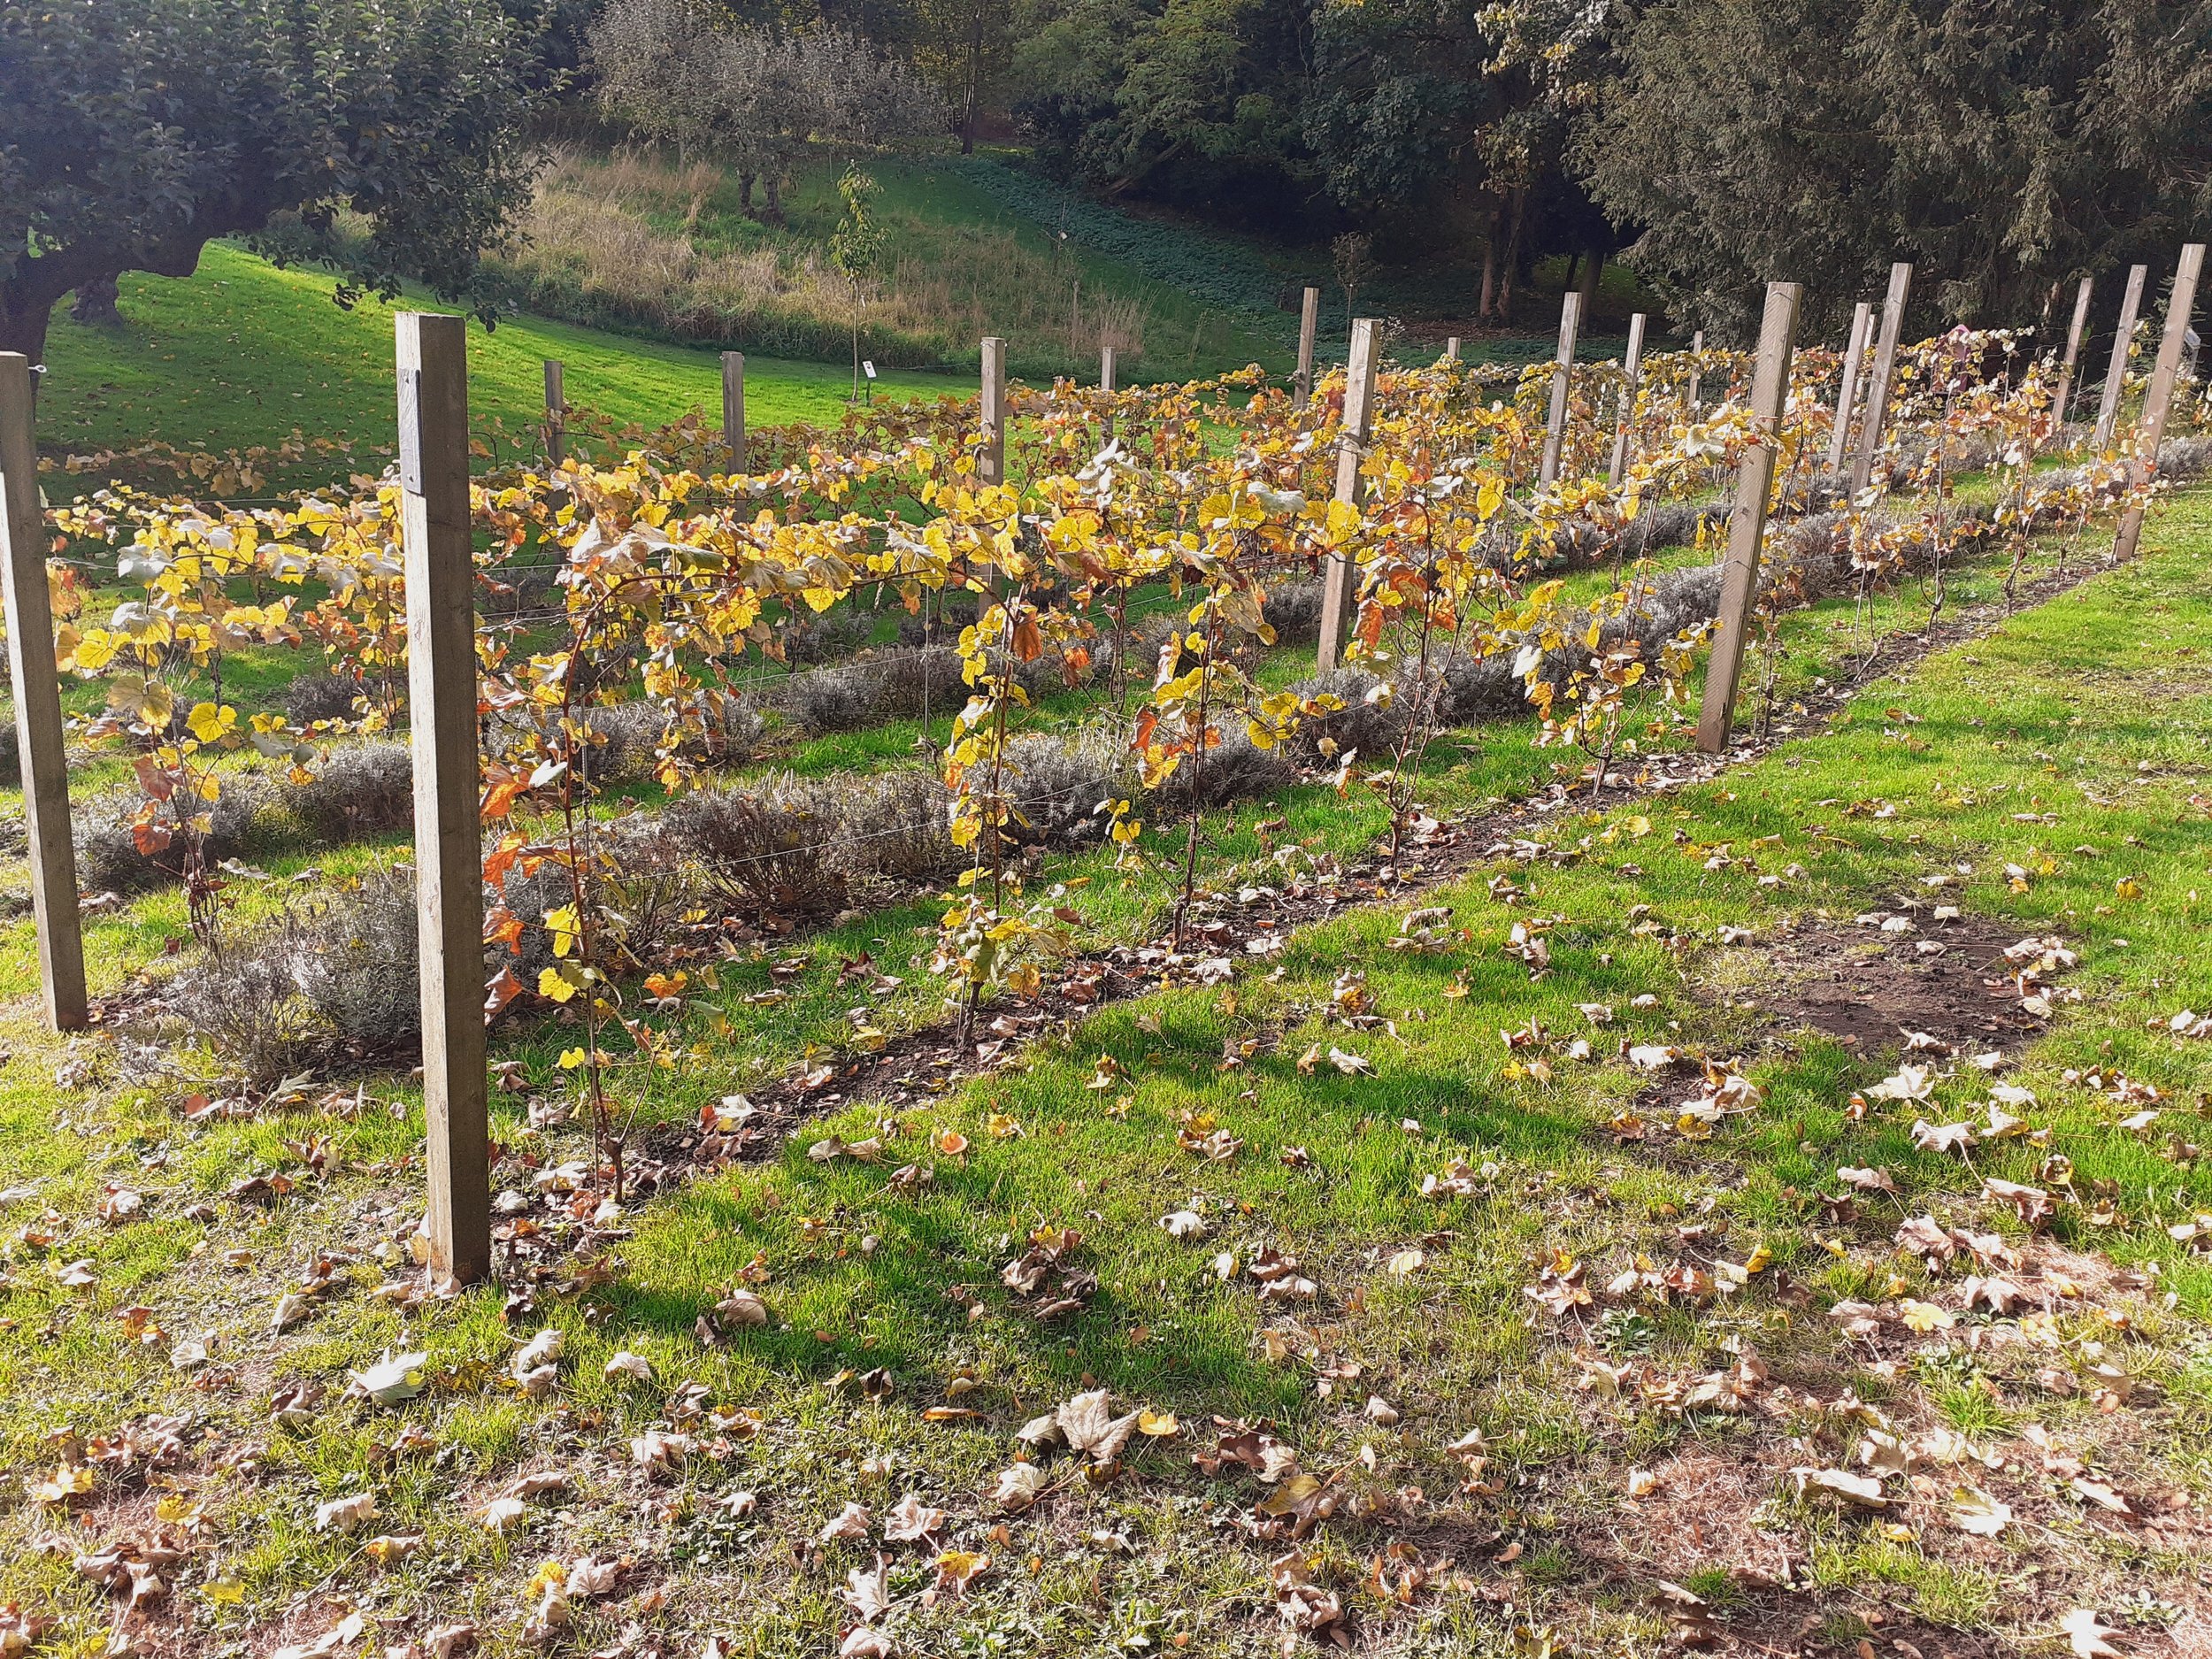 Photograph of the recently planted vineyard in Autumn.